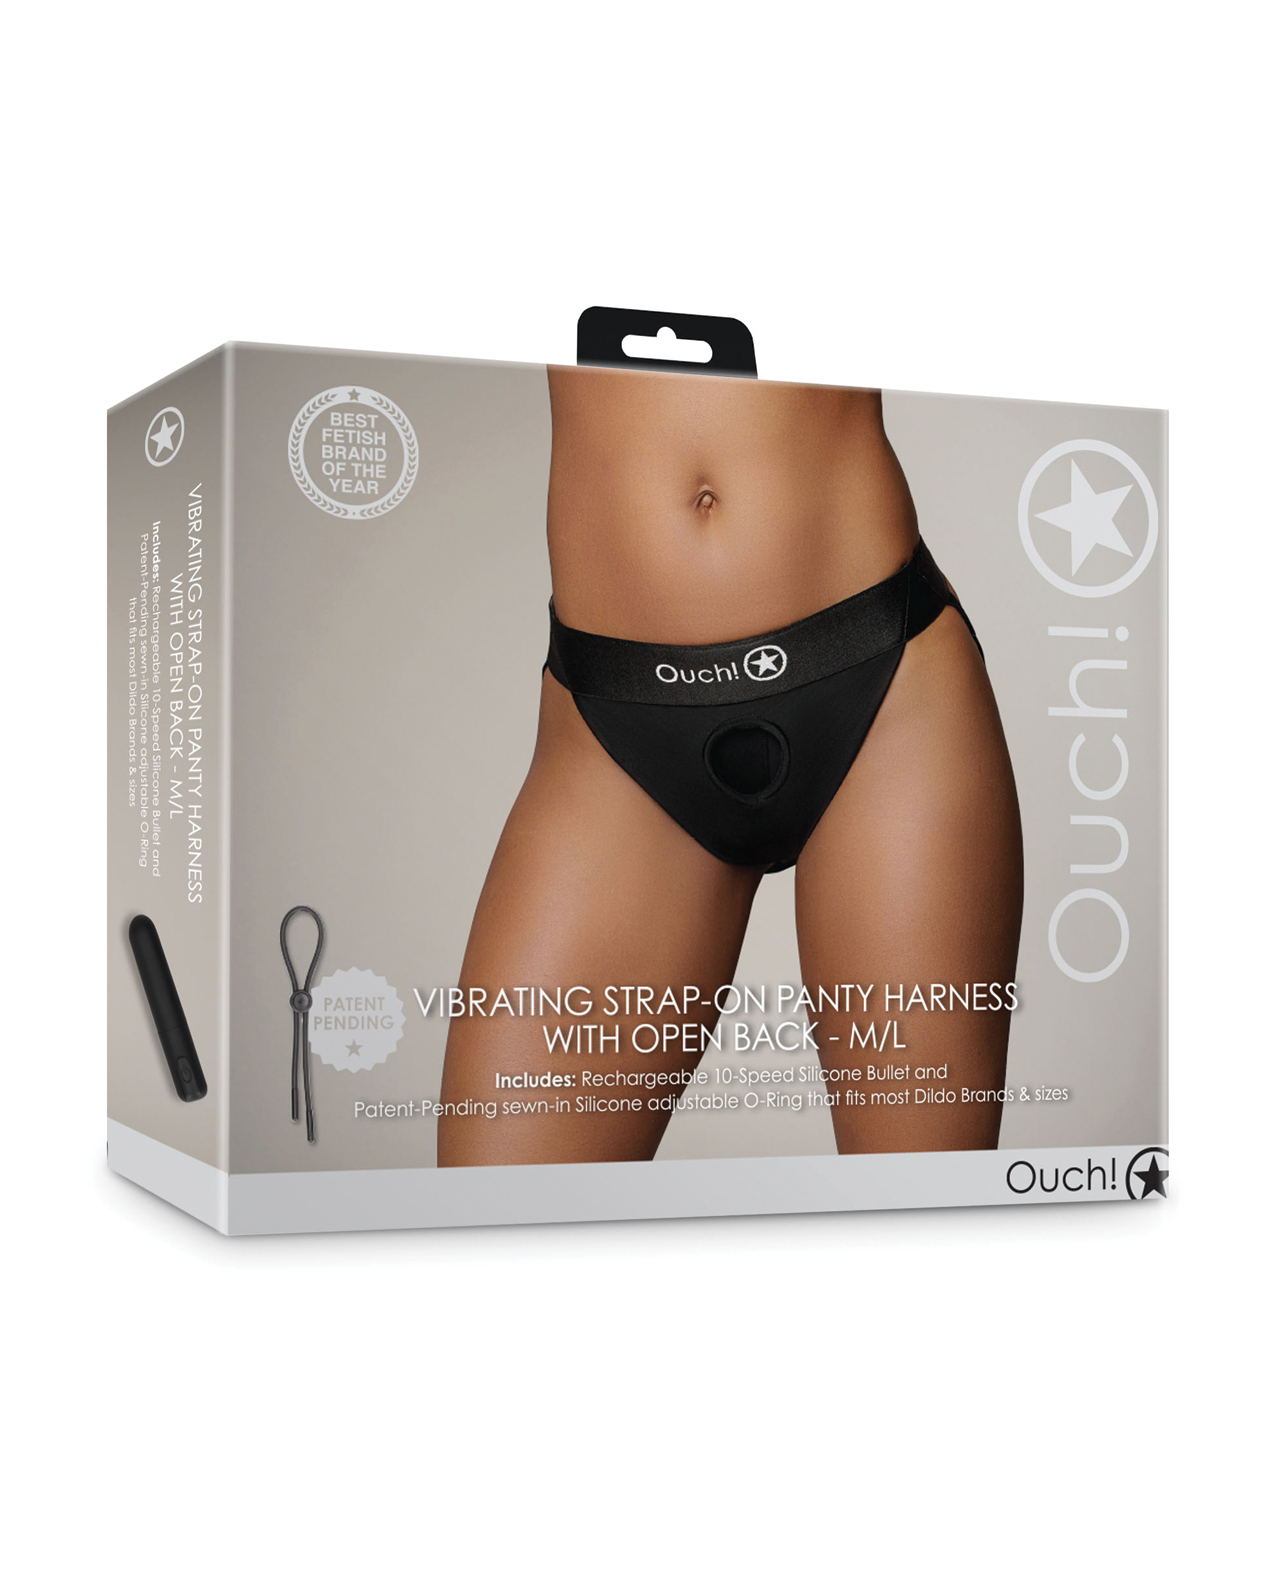 The picture on the packaging is a woman's torso wearing the vibrating panty harness